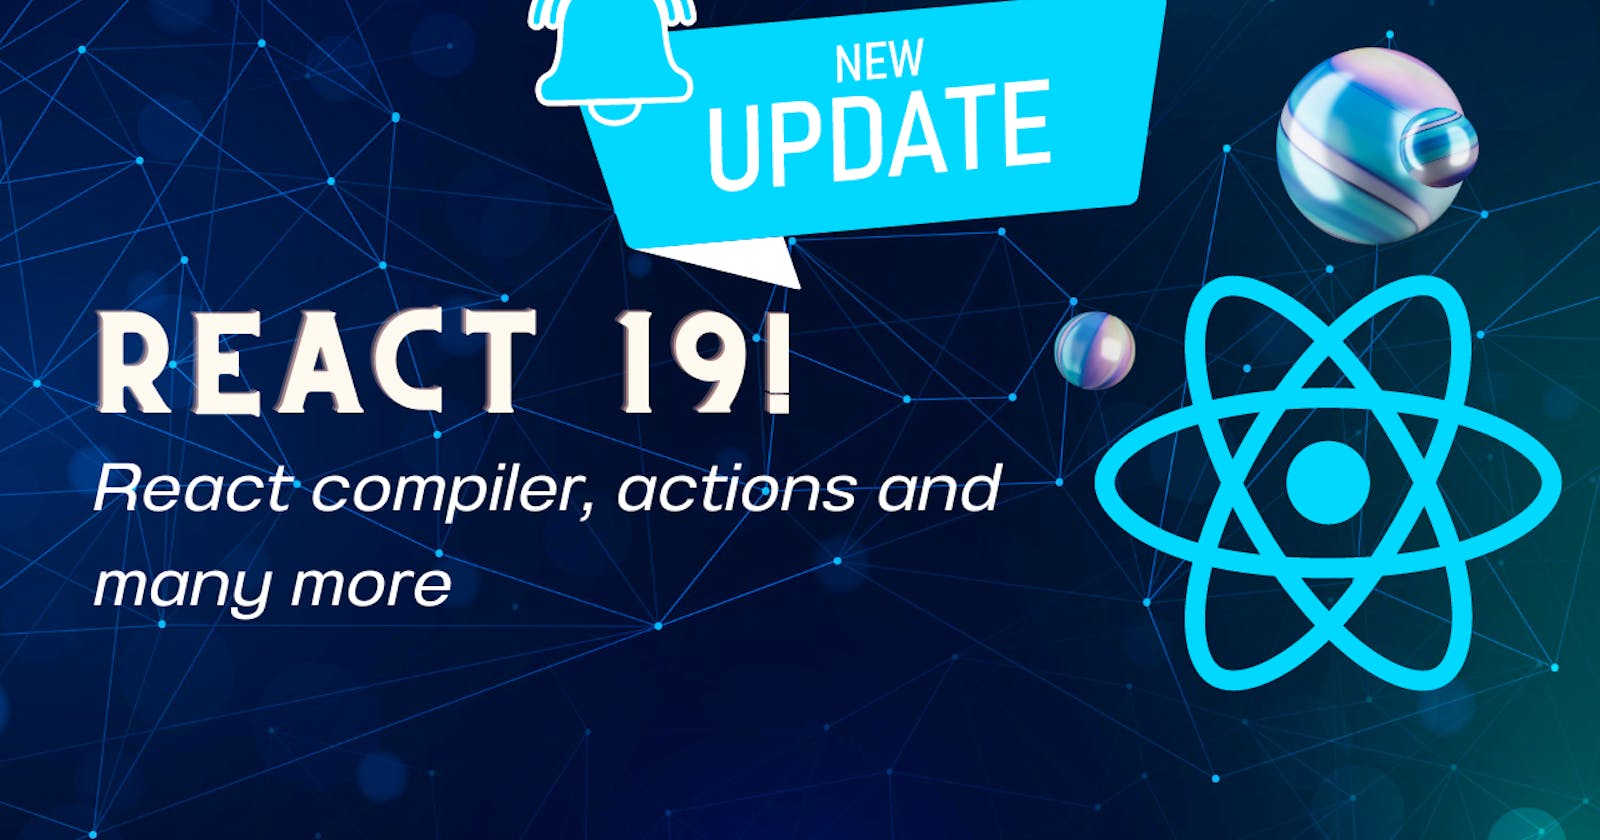 REACT NEW RELEASE: A Deep Dive into React 19 and the Game-Changing React Compiler